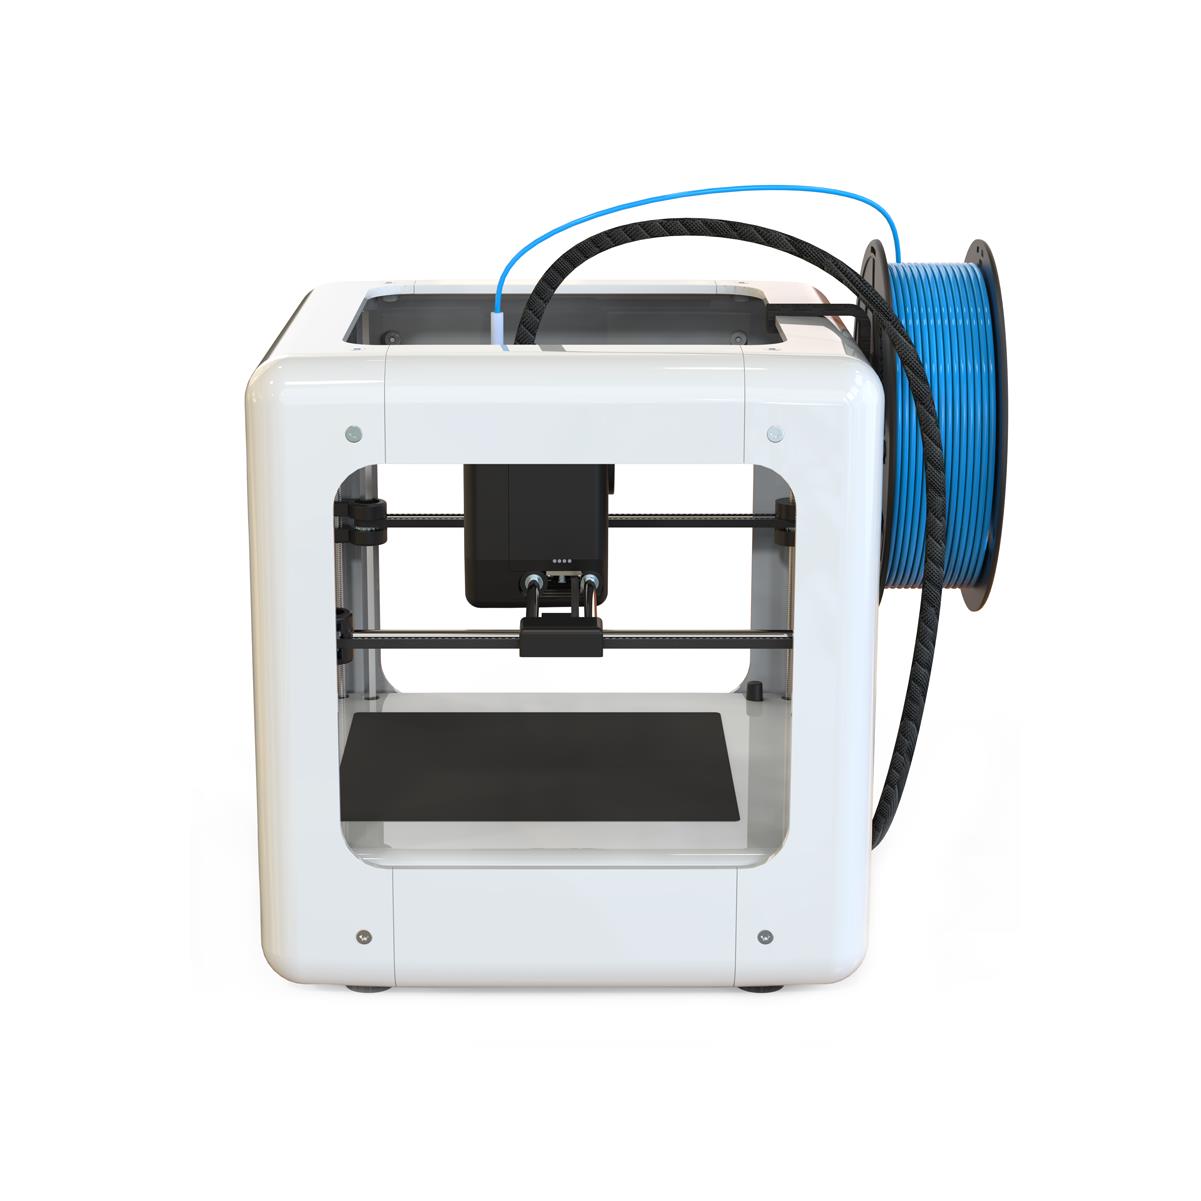 Easythreed® NANO Fully Assembled Mini 3D Printer for Household Education & Students 90*110*110mm Printing Size Support One Key Printing with CE Certificate 16